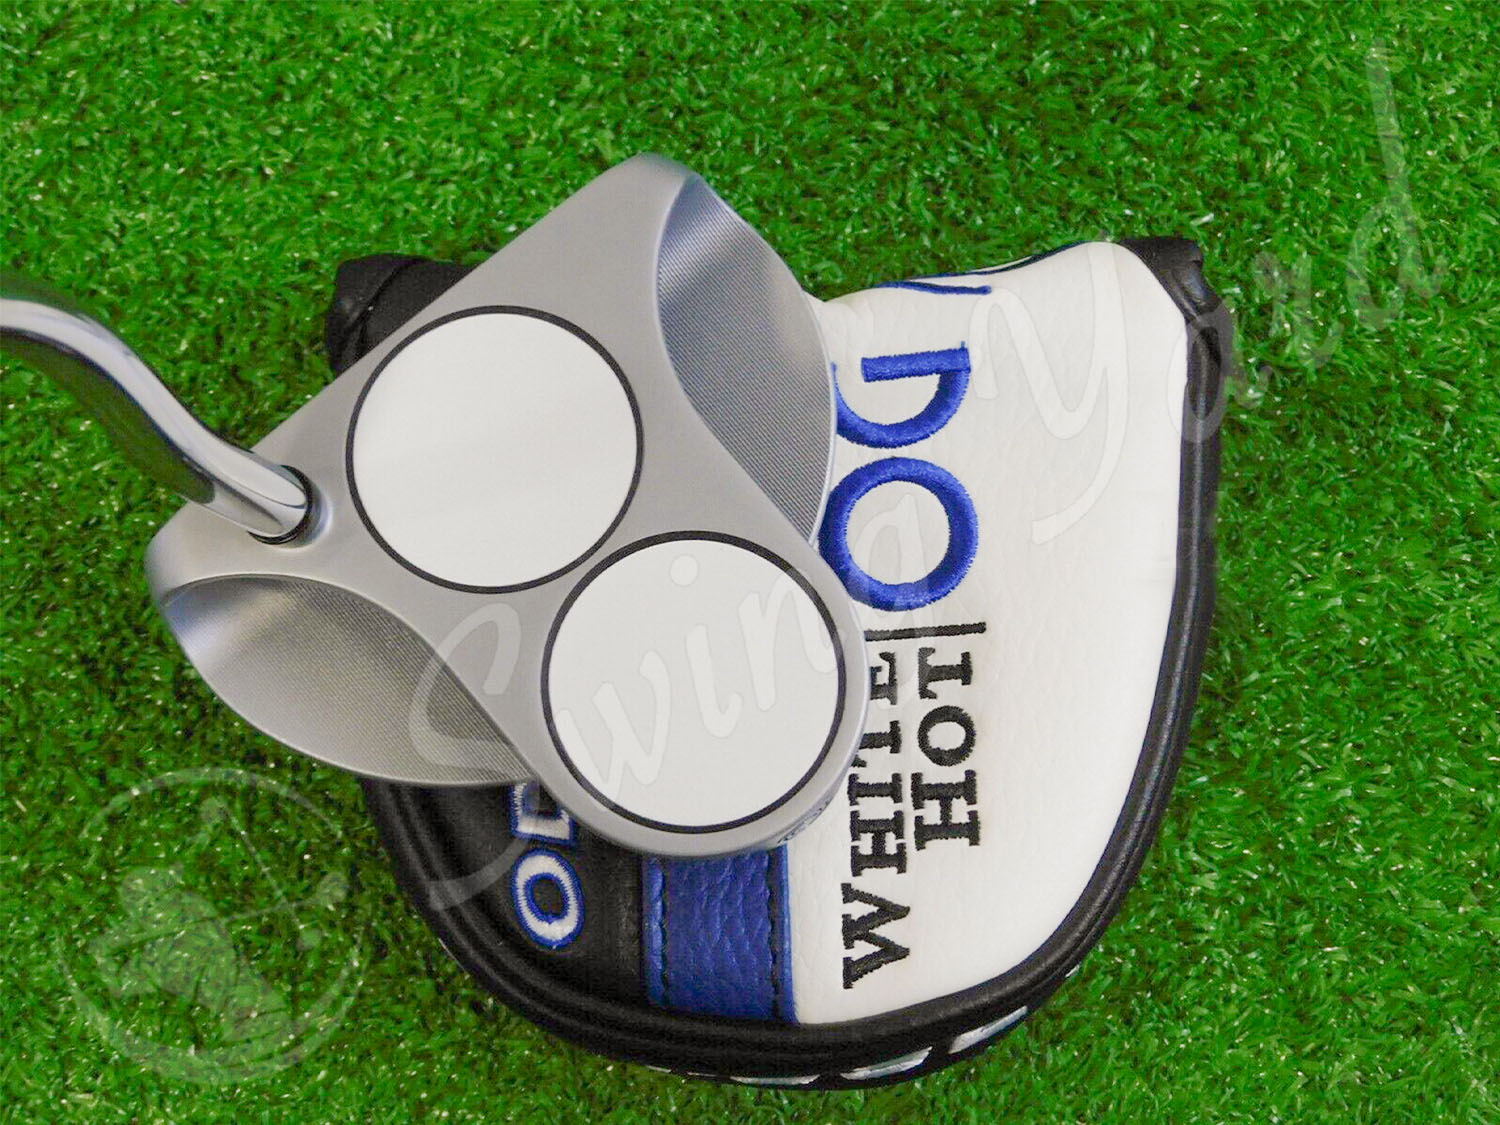 The Odyssey White Hot OG 2 Ball Putter with headcover at the range